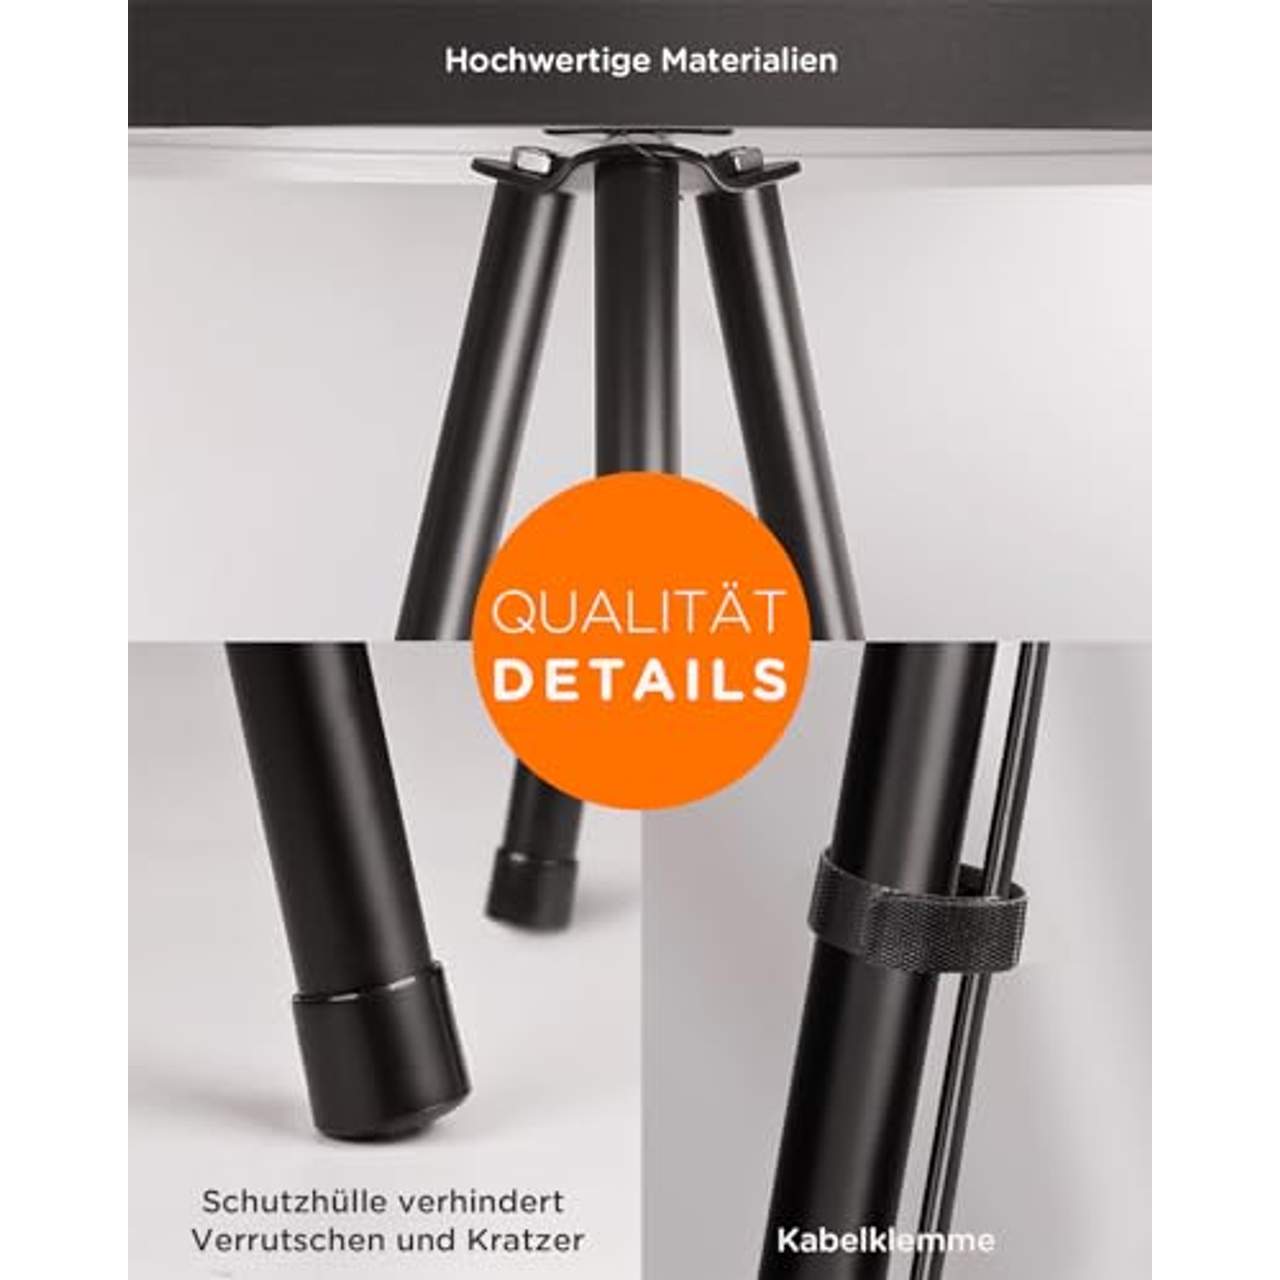 Tomons Stehlampe LED Dimmbar Stehleuchte Moderne